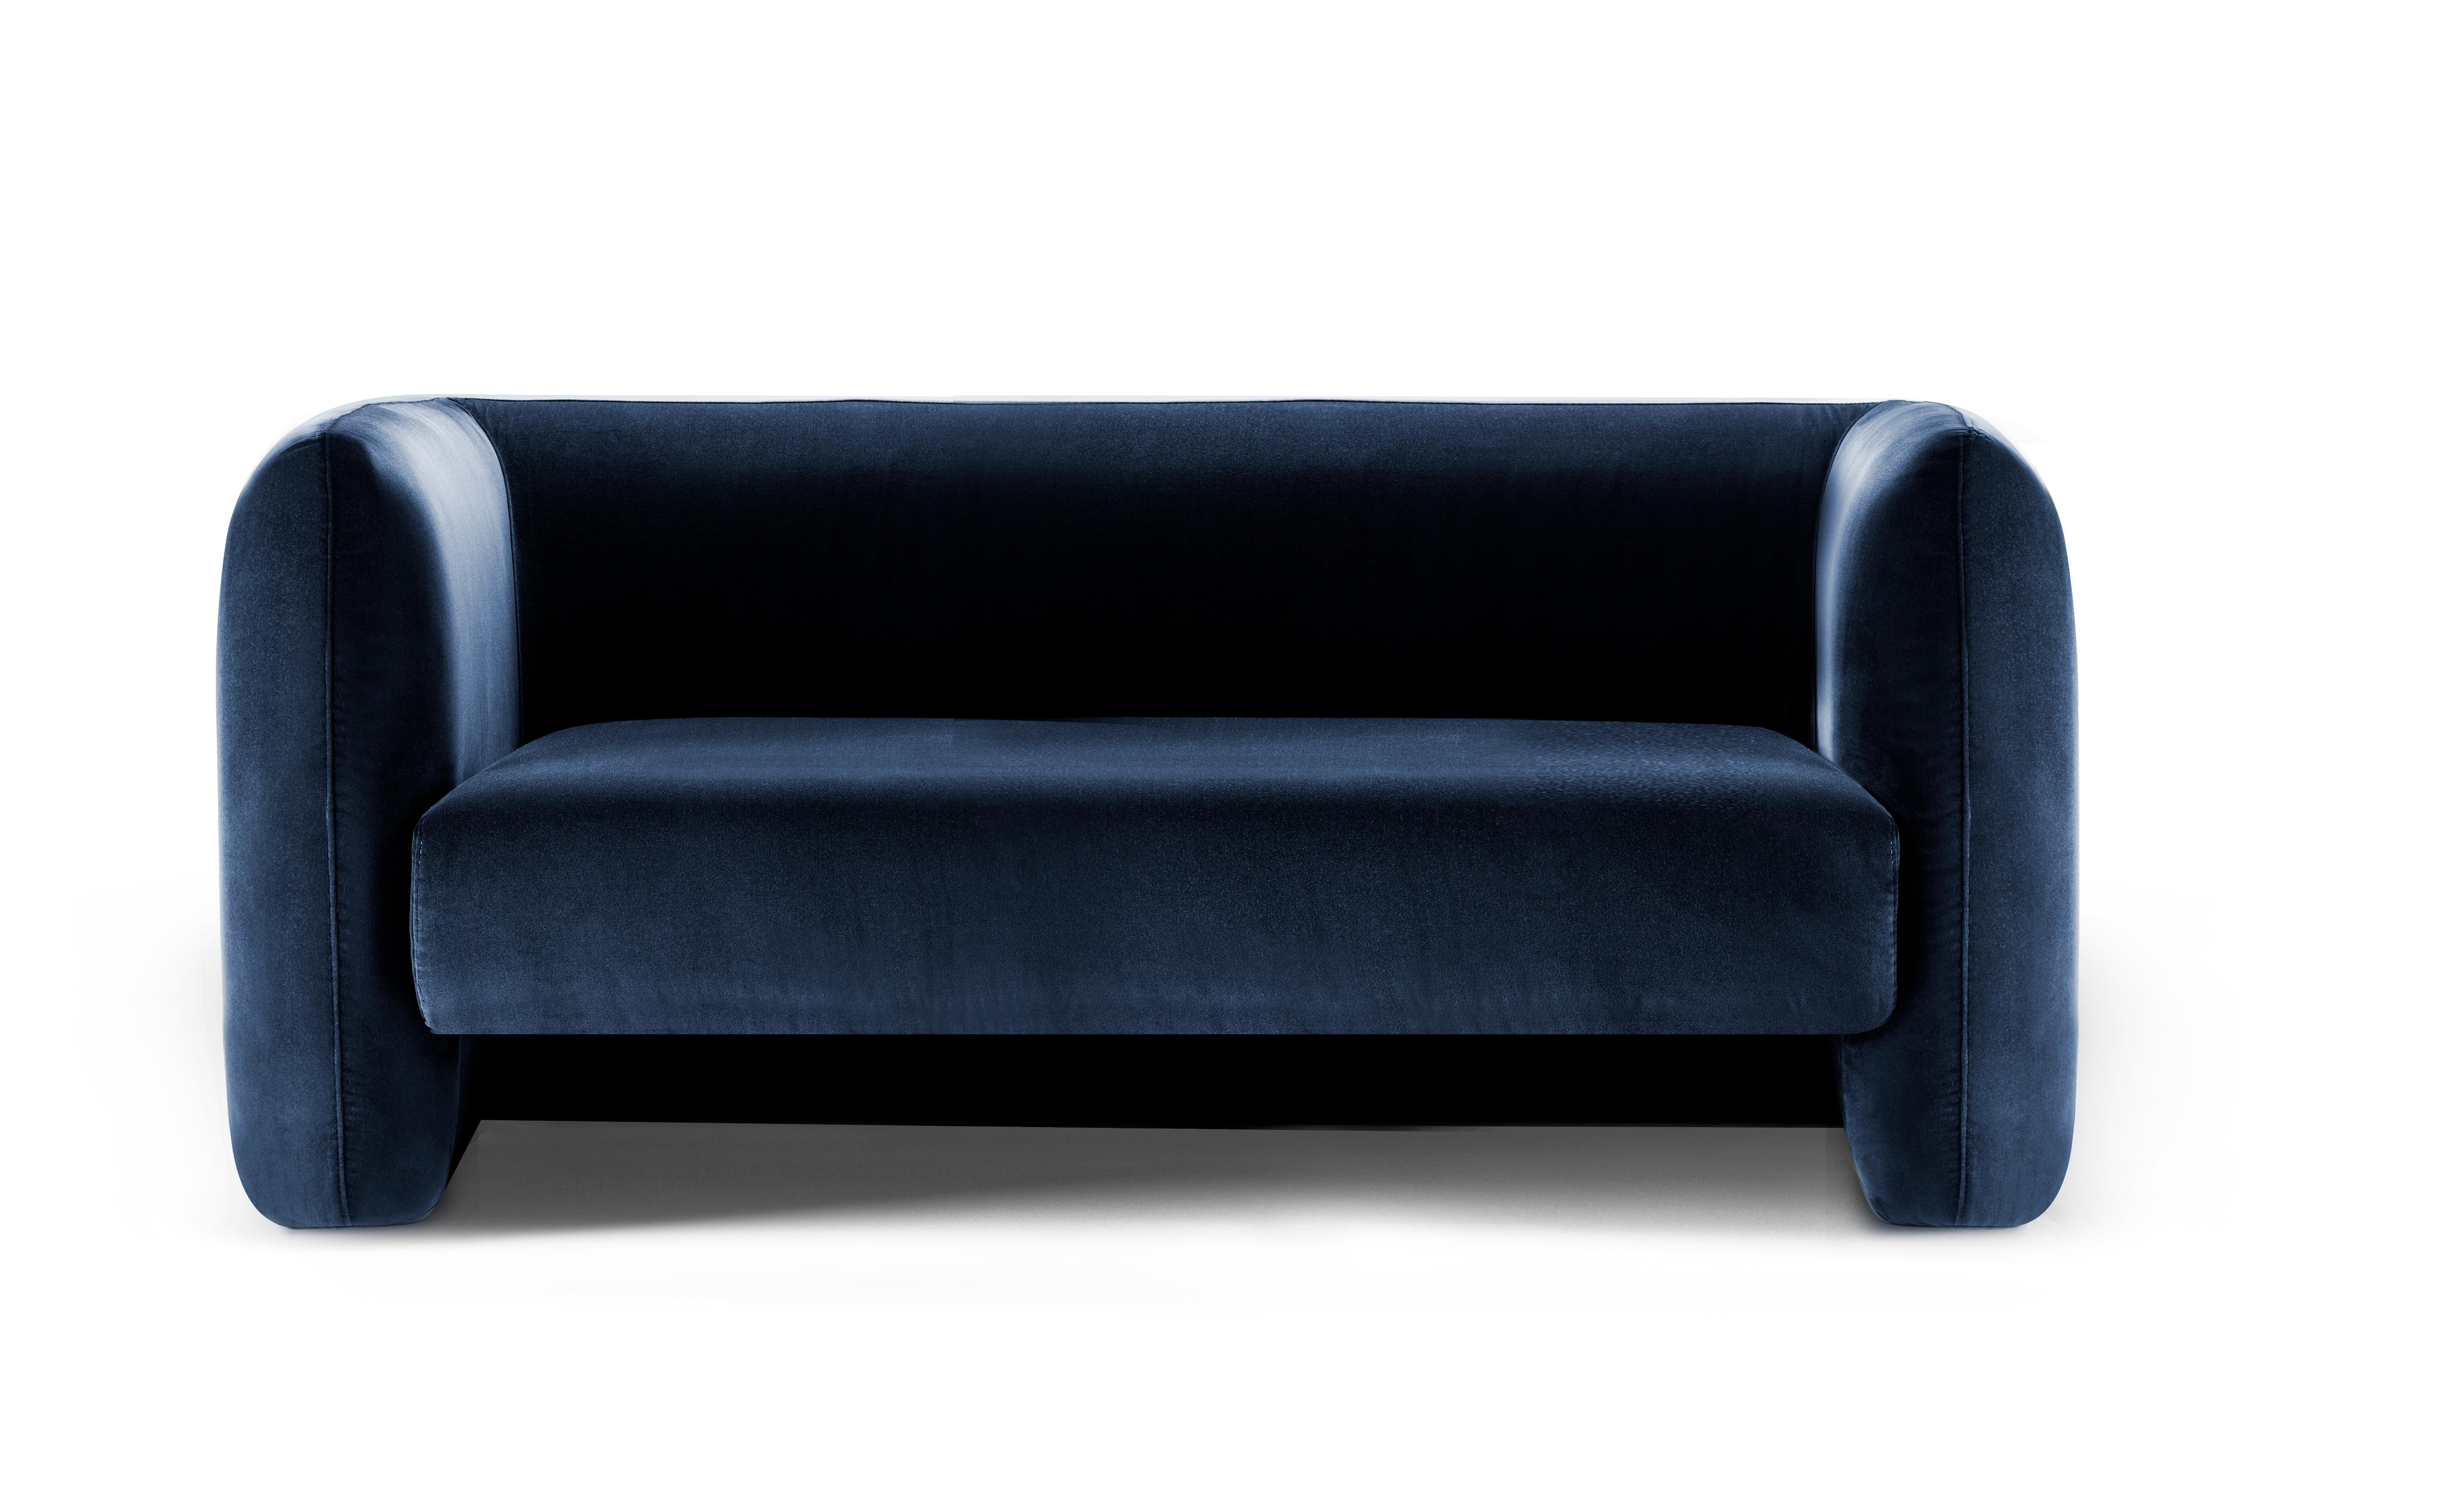 Contemporary Modern Jacob Sofa in Deep Blue Velvet Fabric by Collector Studio

This fun and sophisticated 21st century sofa designed by Collector Studio, it’s simple shape and attractive color game along with other possible combinations of materials